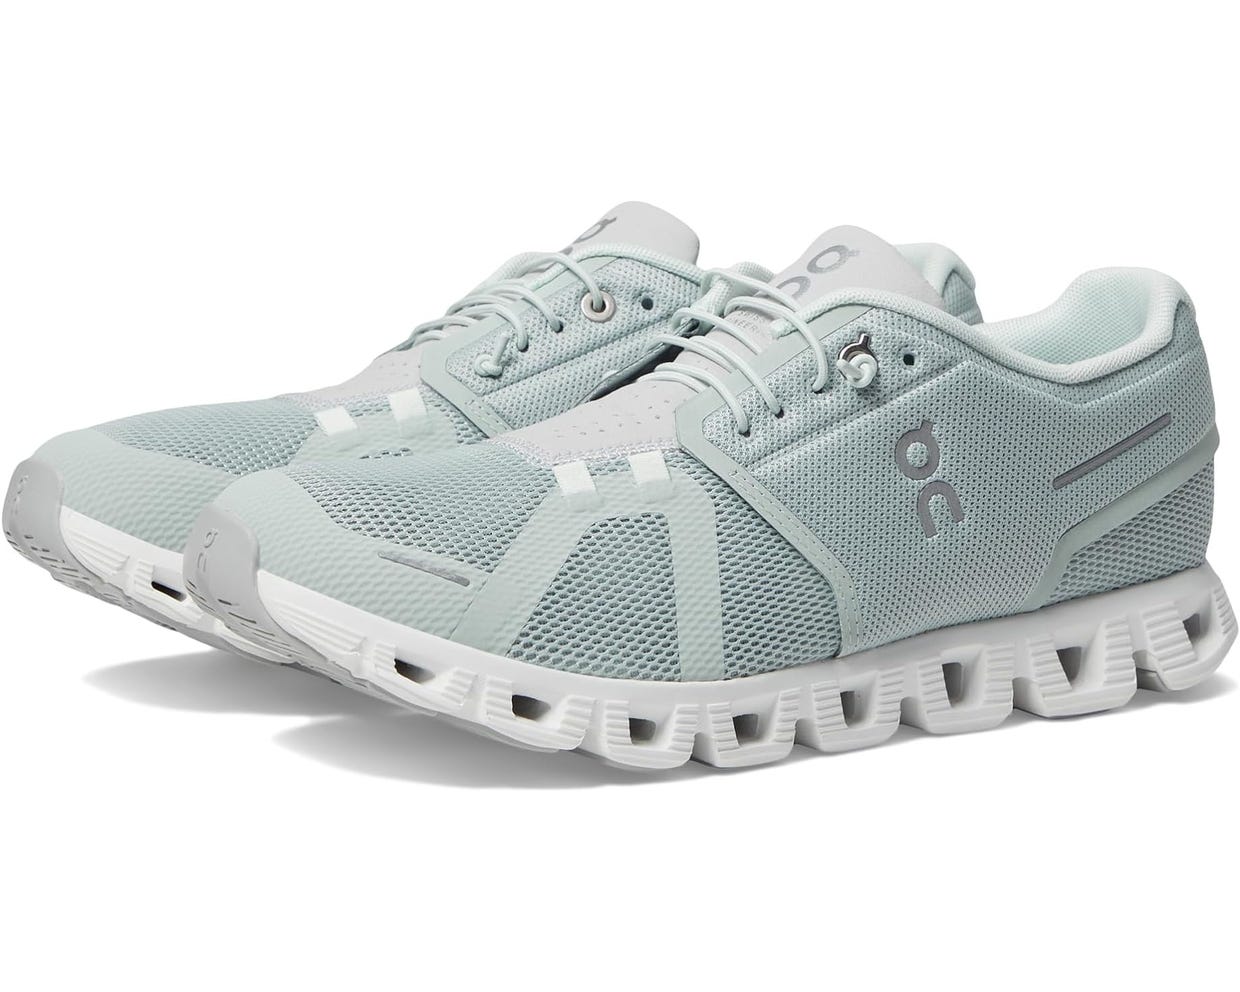 A pair of light blue running shoes with white soles.